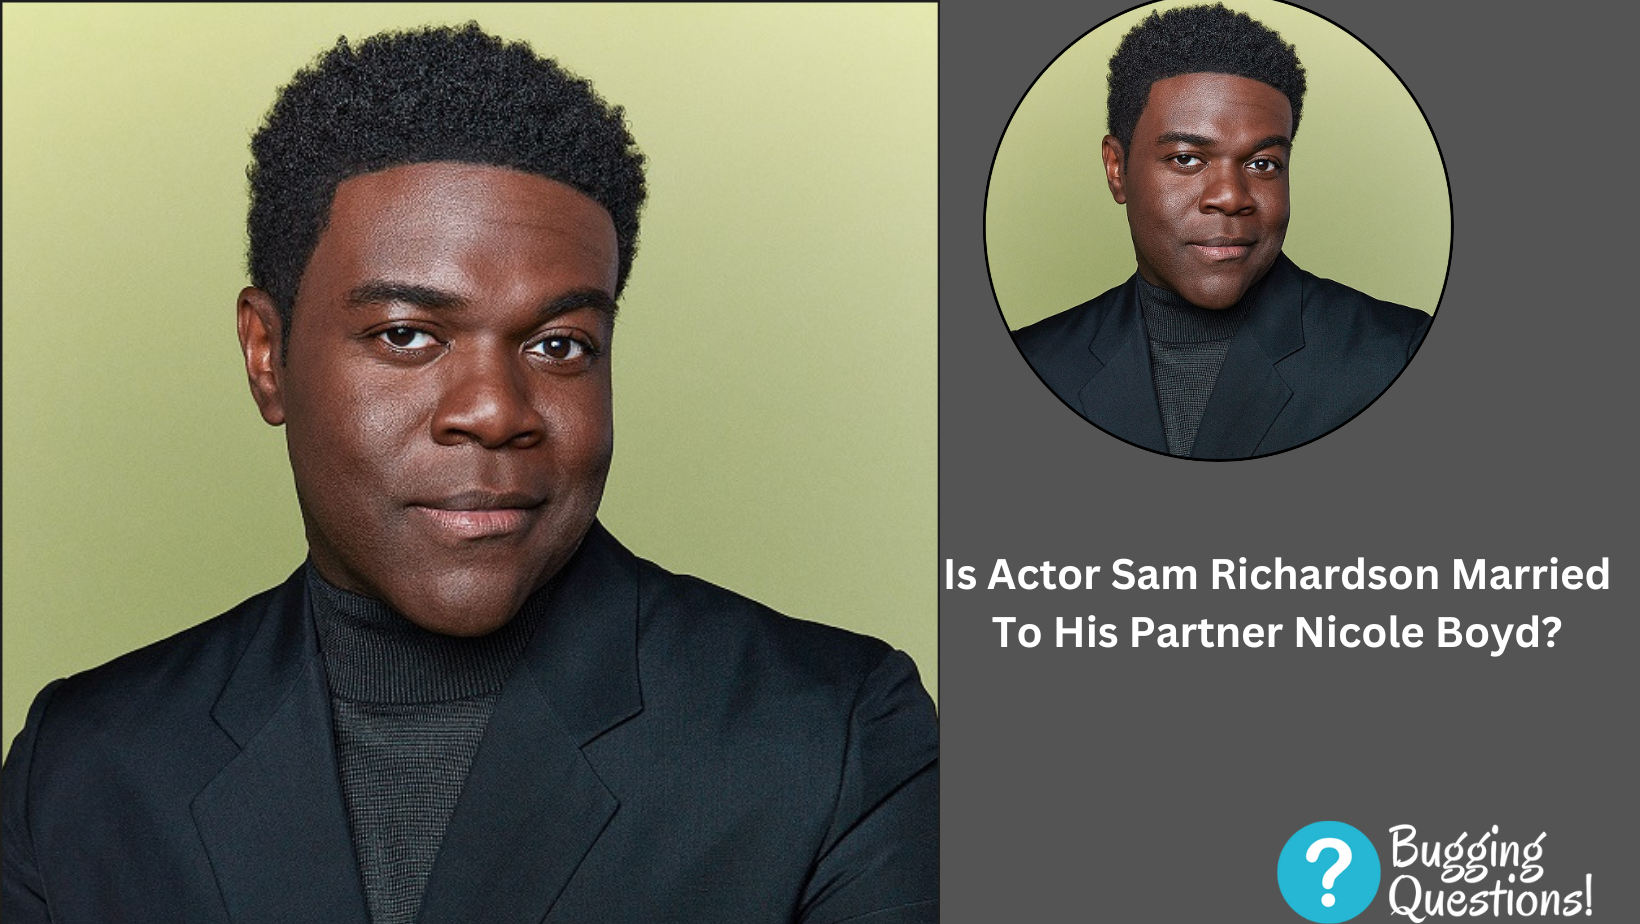 Is Actor Sam Richardson Married To His Partner Nicole Boyd?